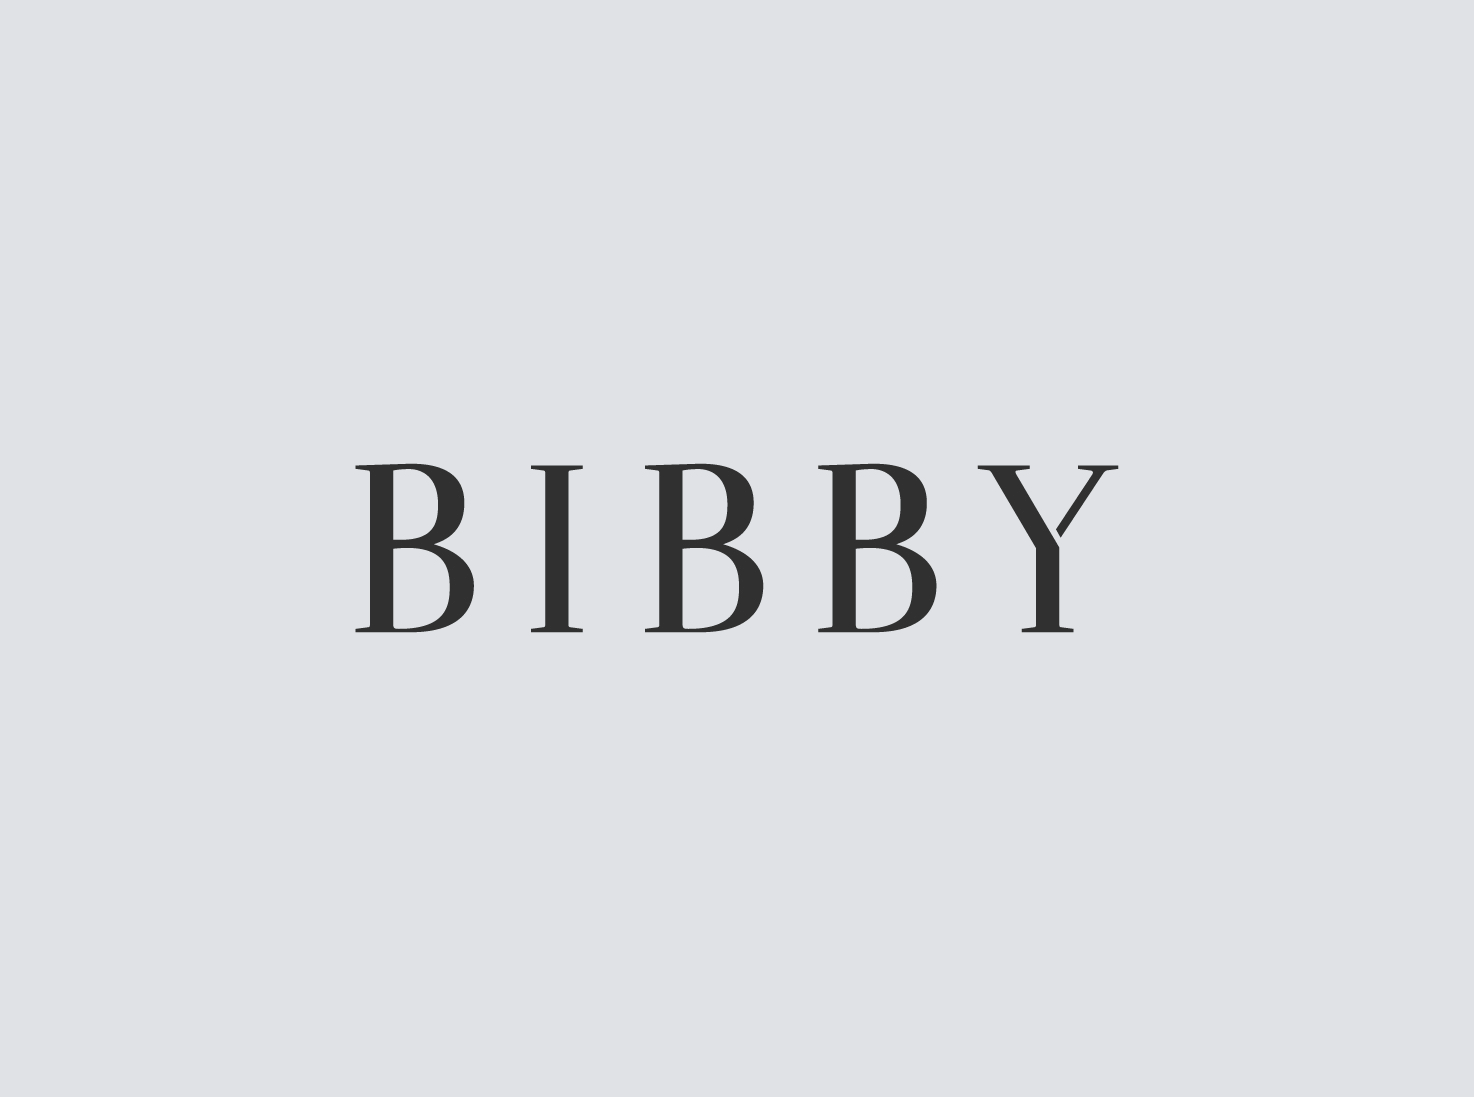 Bibby Logo Fading In and Out